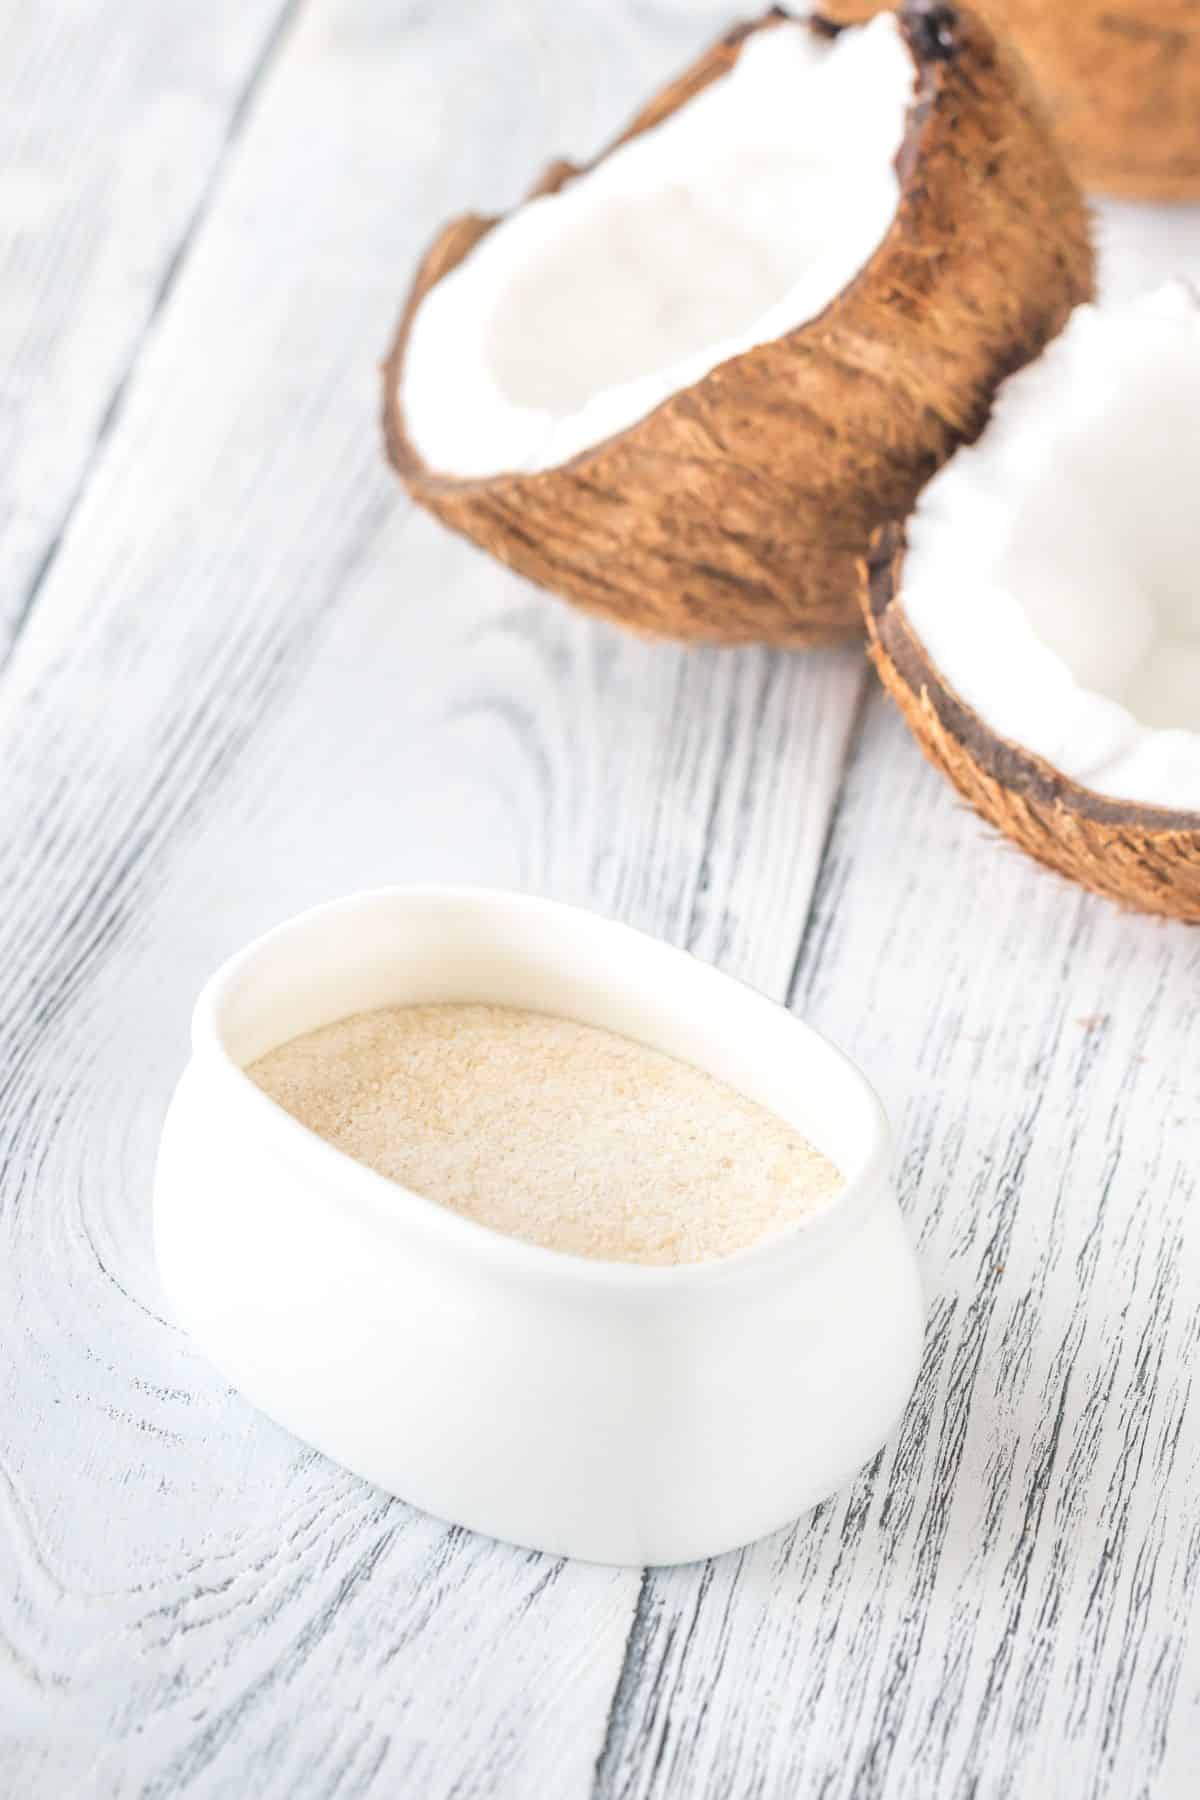 White bowl of coconut flour and coconuts on wooden surface.